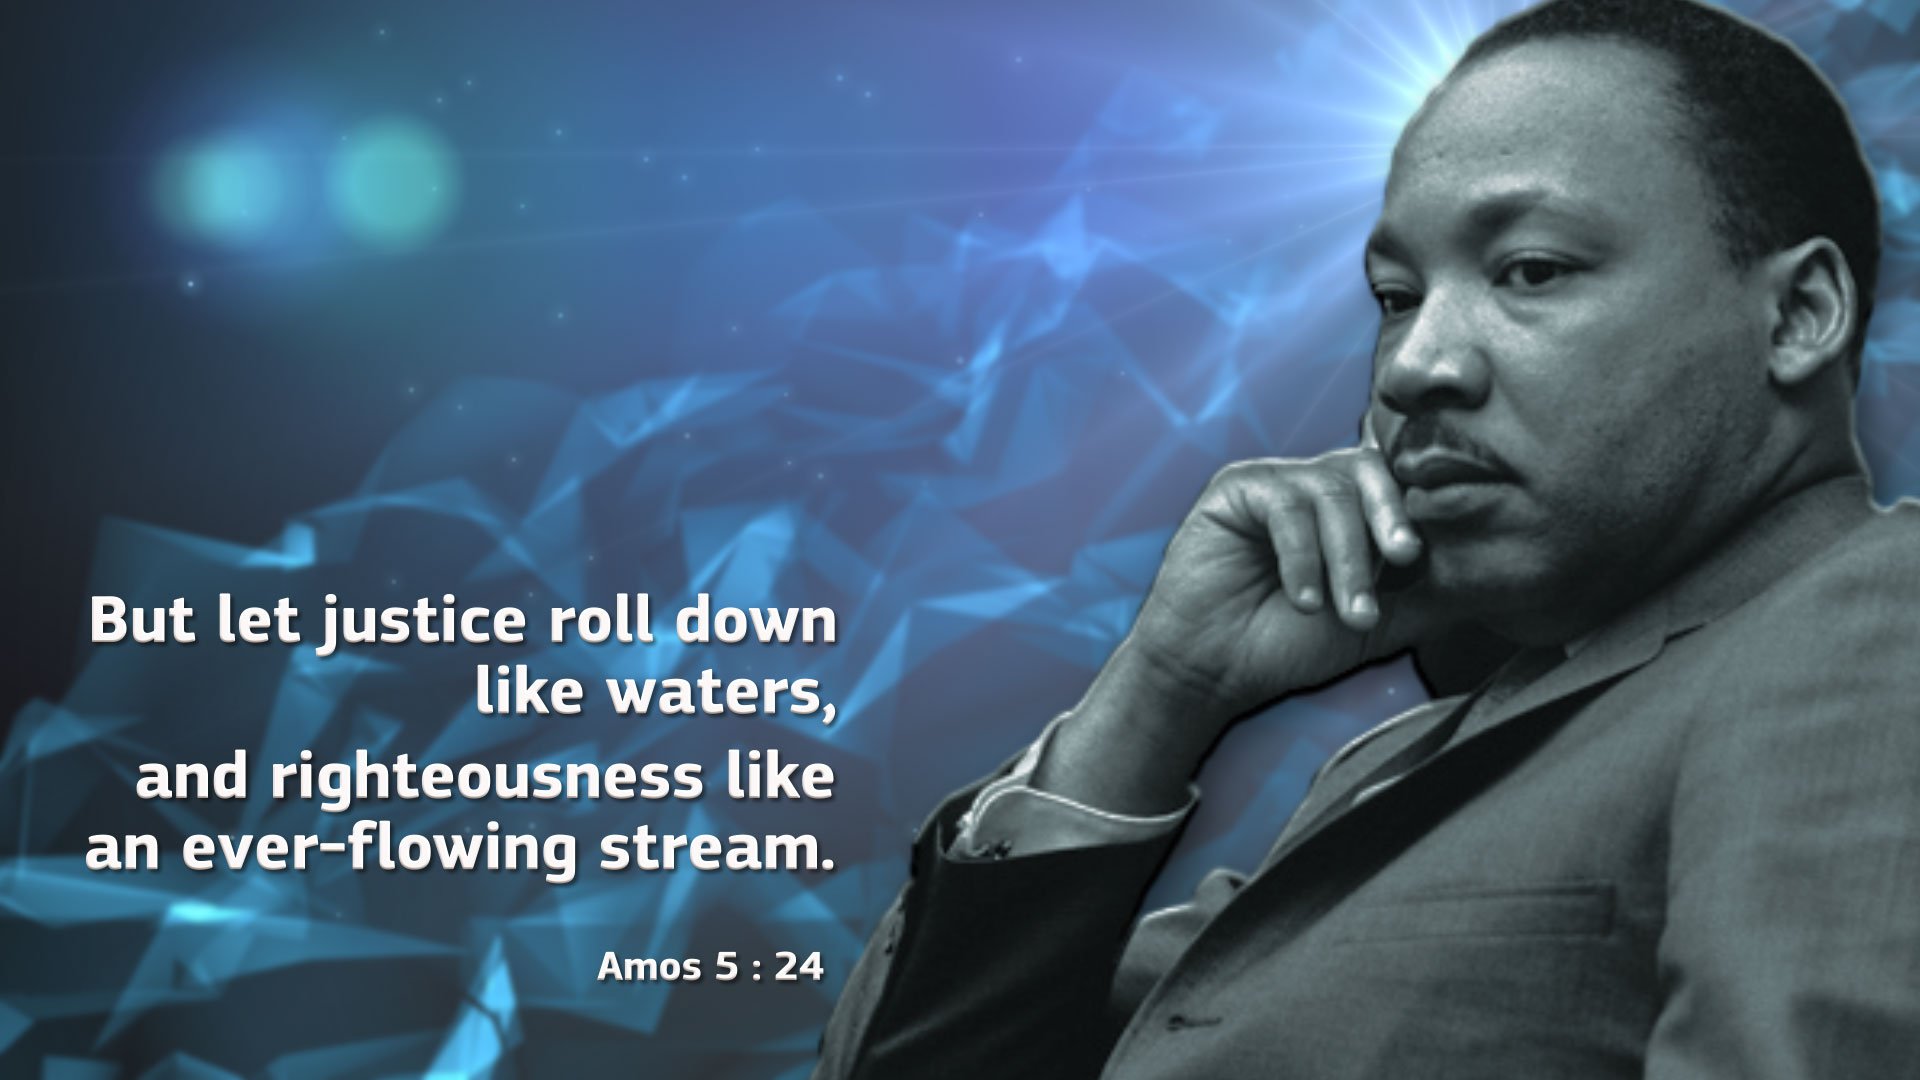 Dr Martin Luther King Jr Amos 5 24 - HD Wallpaper 